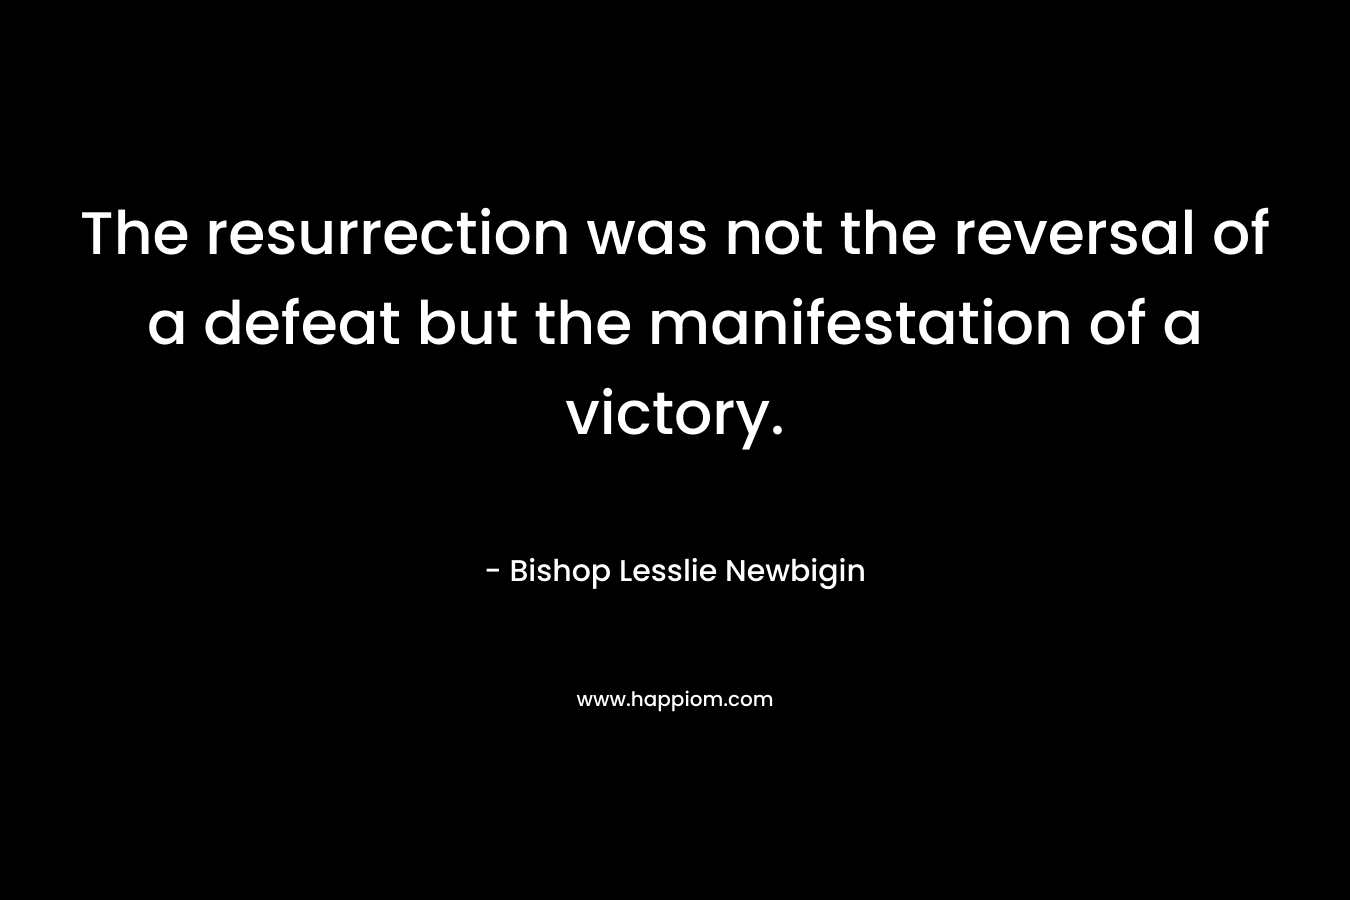 The resurrection was not the reversal of a defeat but the manifestation of a victory.